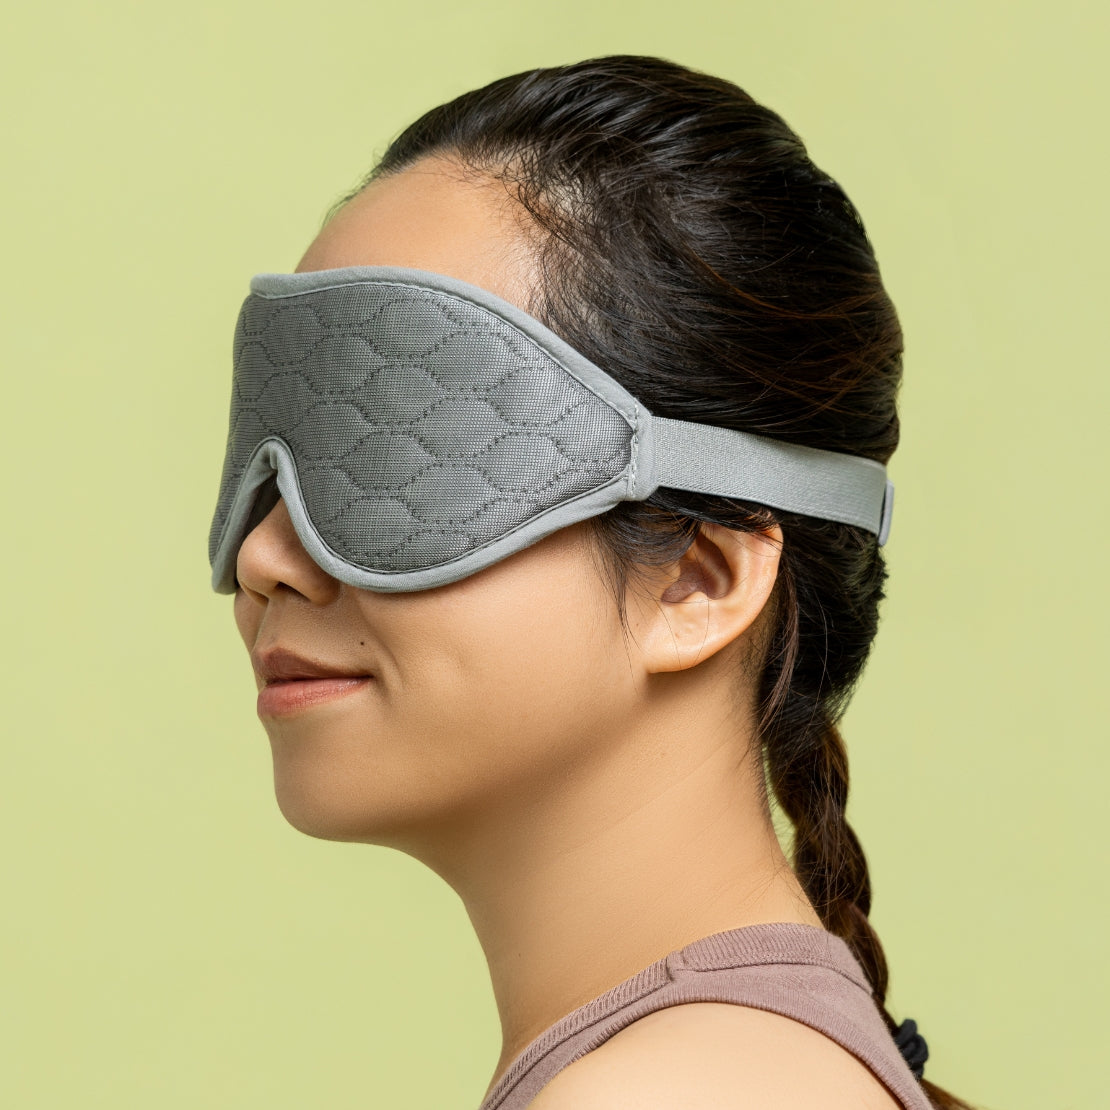  A woman wearing a gray textured sleeping mask that covers her eyes, with an adjustable strap around her head. The mask appears padded for comfort